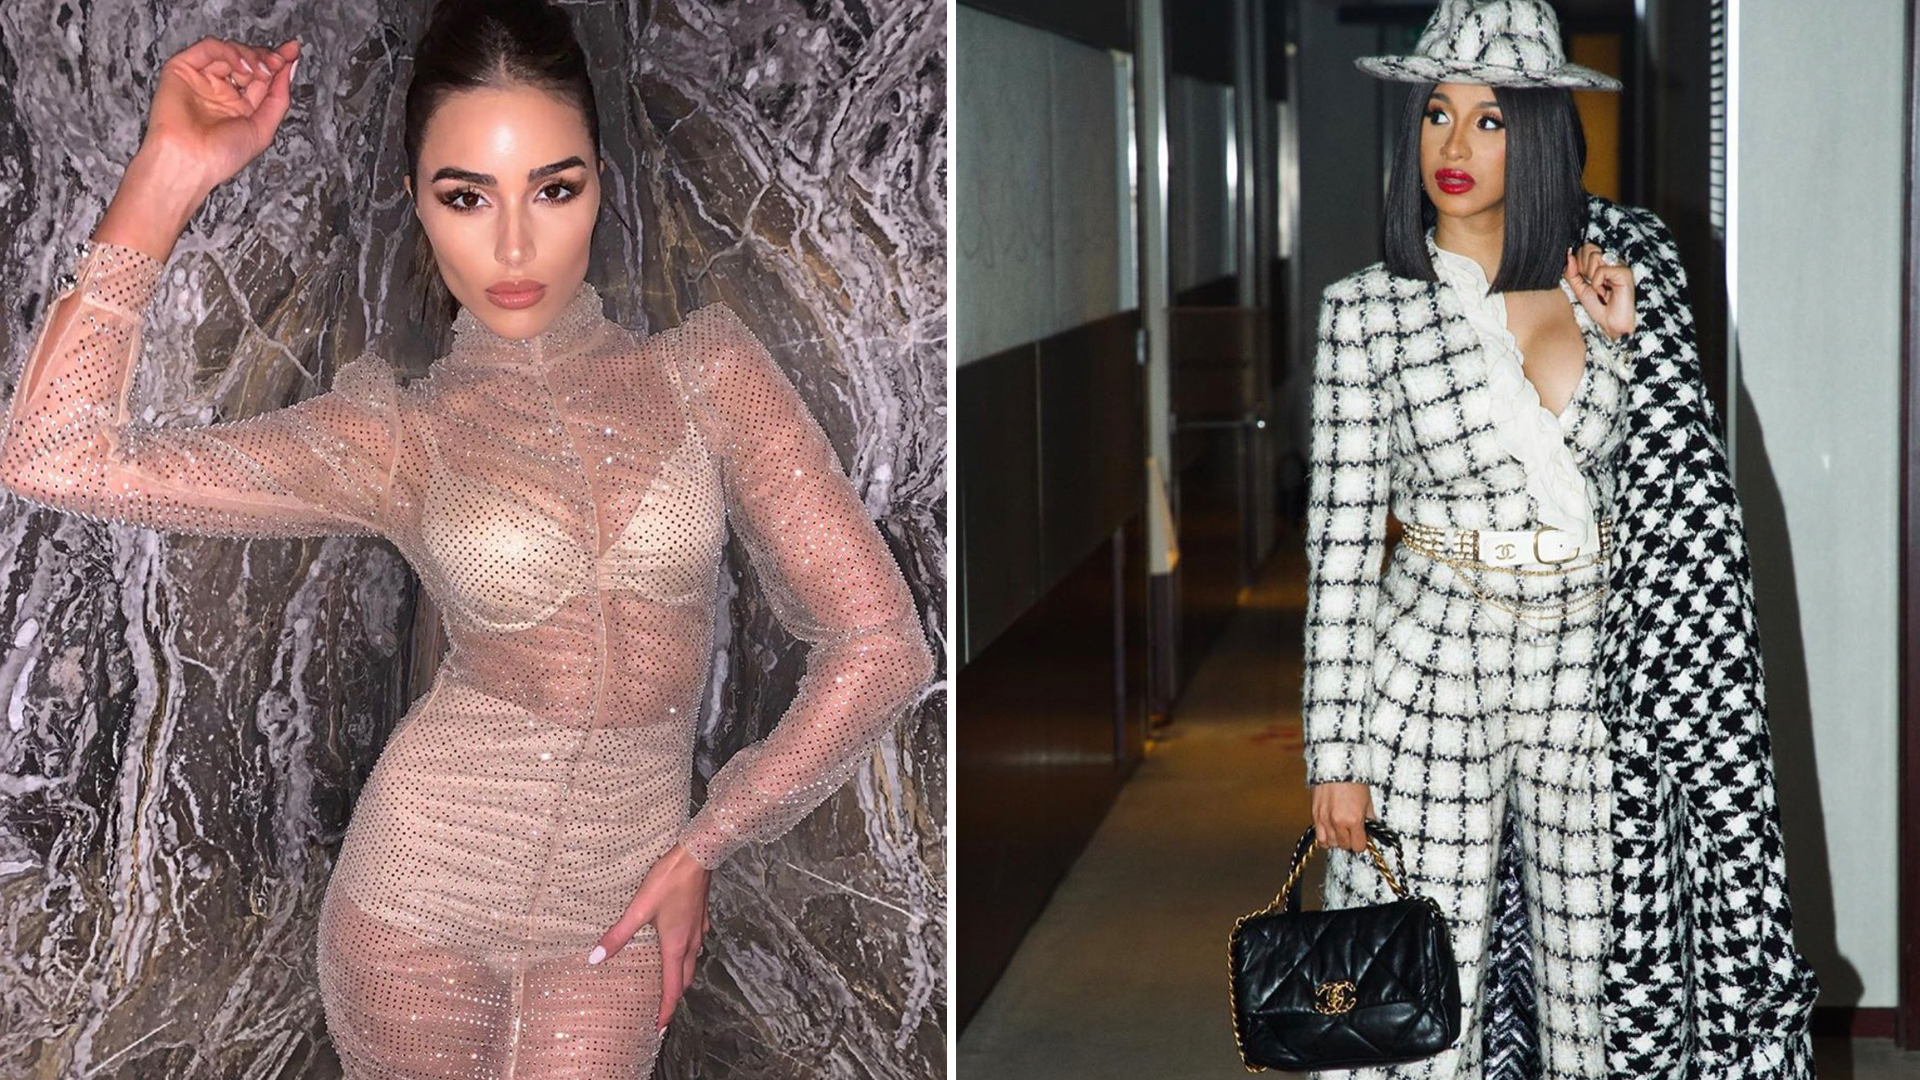 10 Celebrity Looks To Inspire All Of Your Holiday Outfits